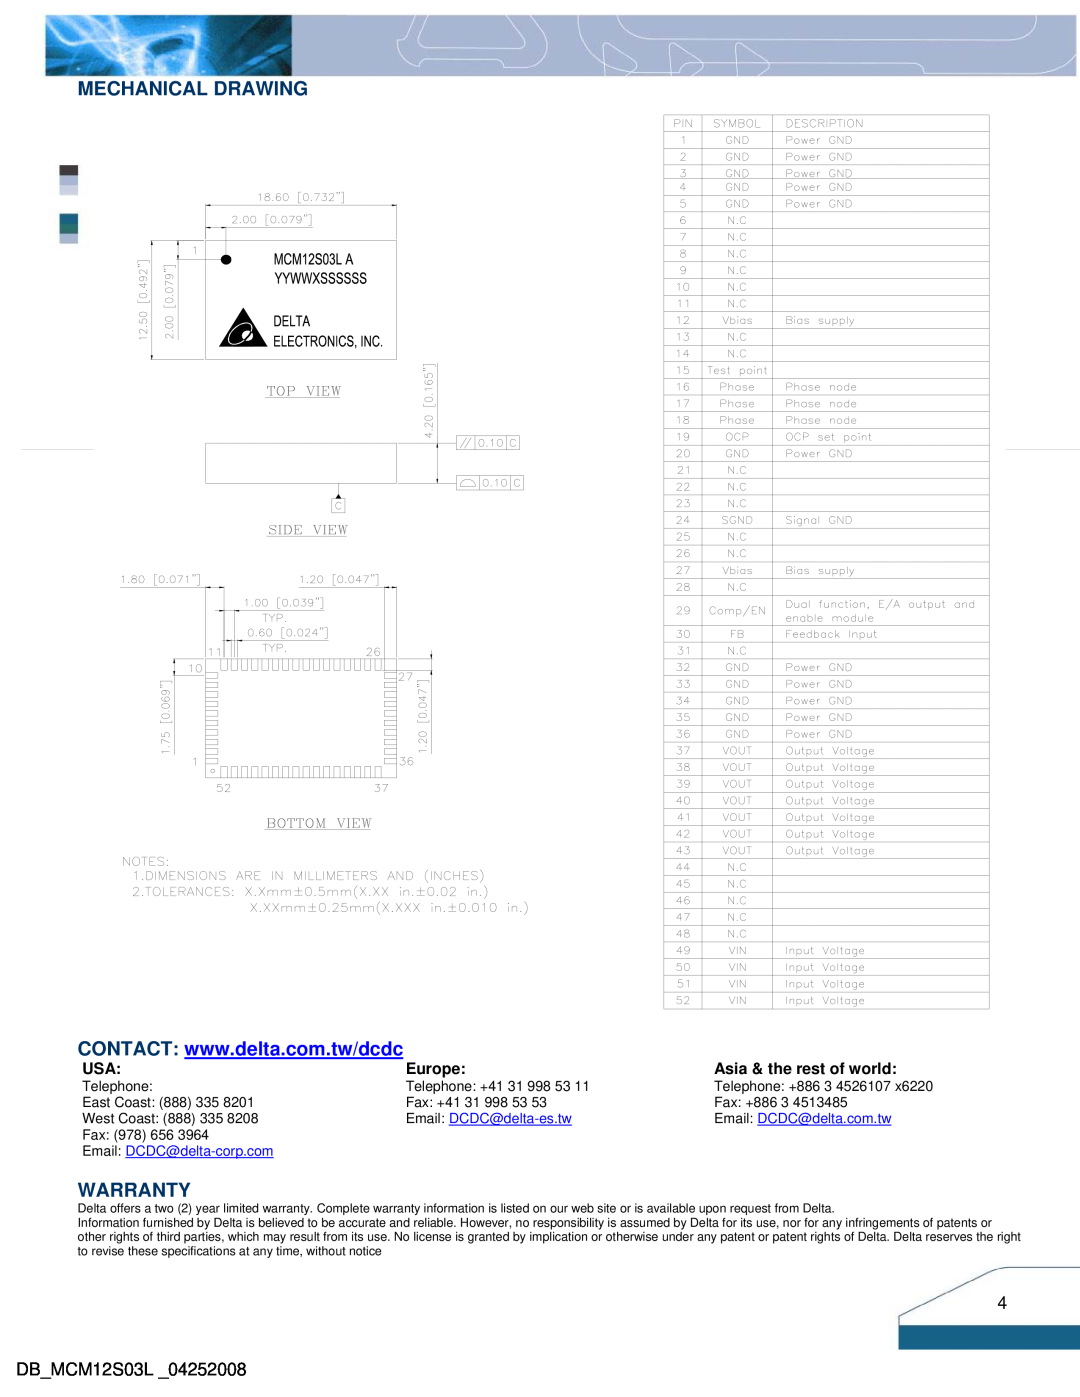 Delta Electronics Mechanical Drawing, Warranty, DBMCM12S03L, Europe, Asia & the rest of world, Email DCDC@delta-es.tw 